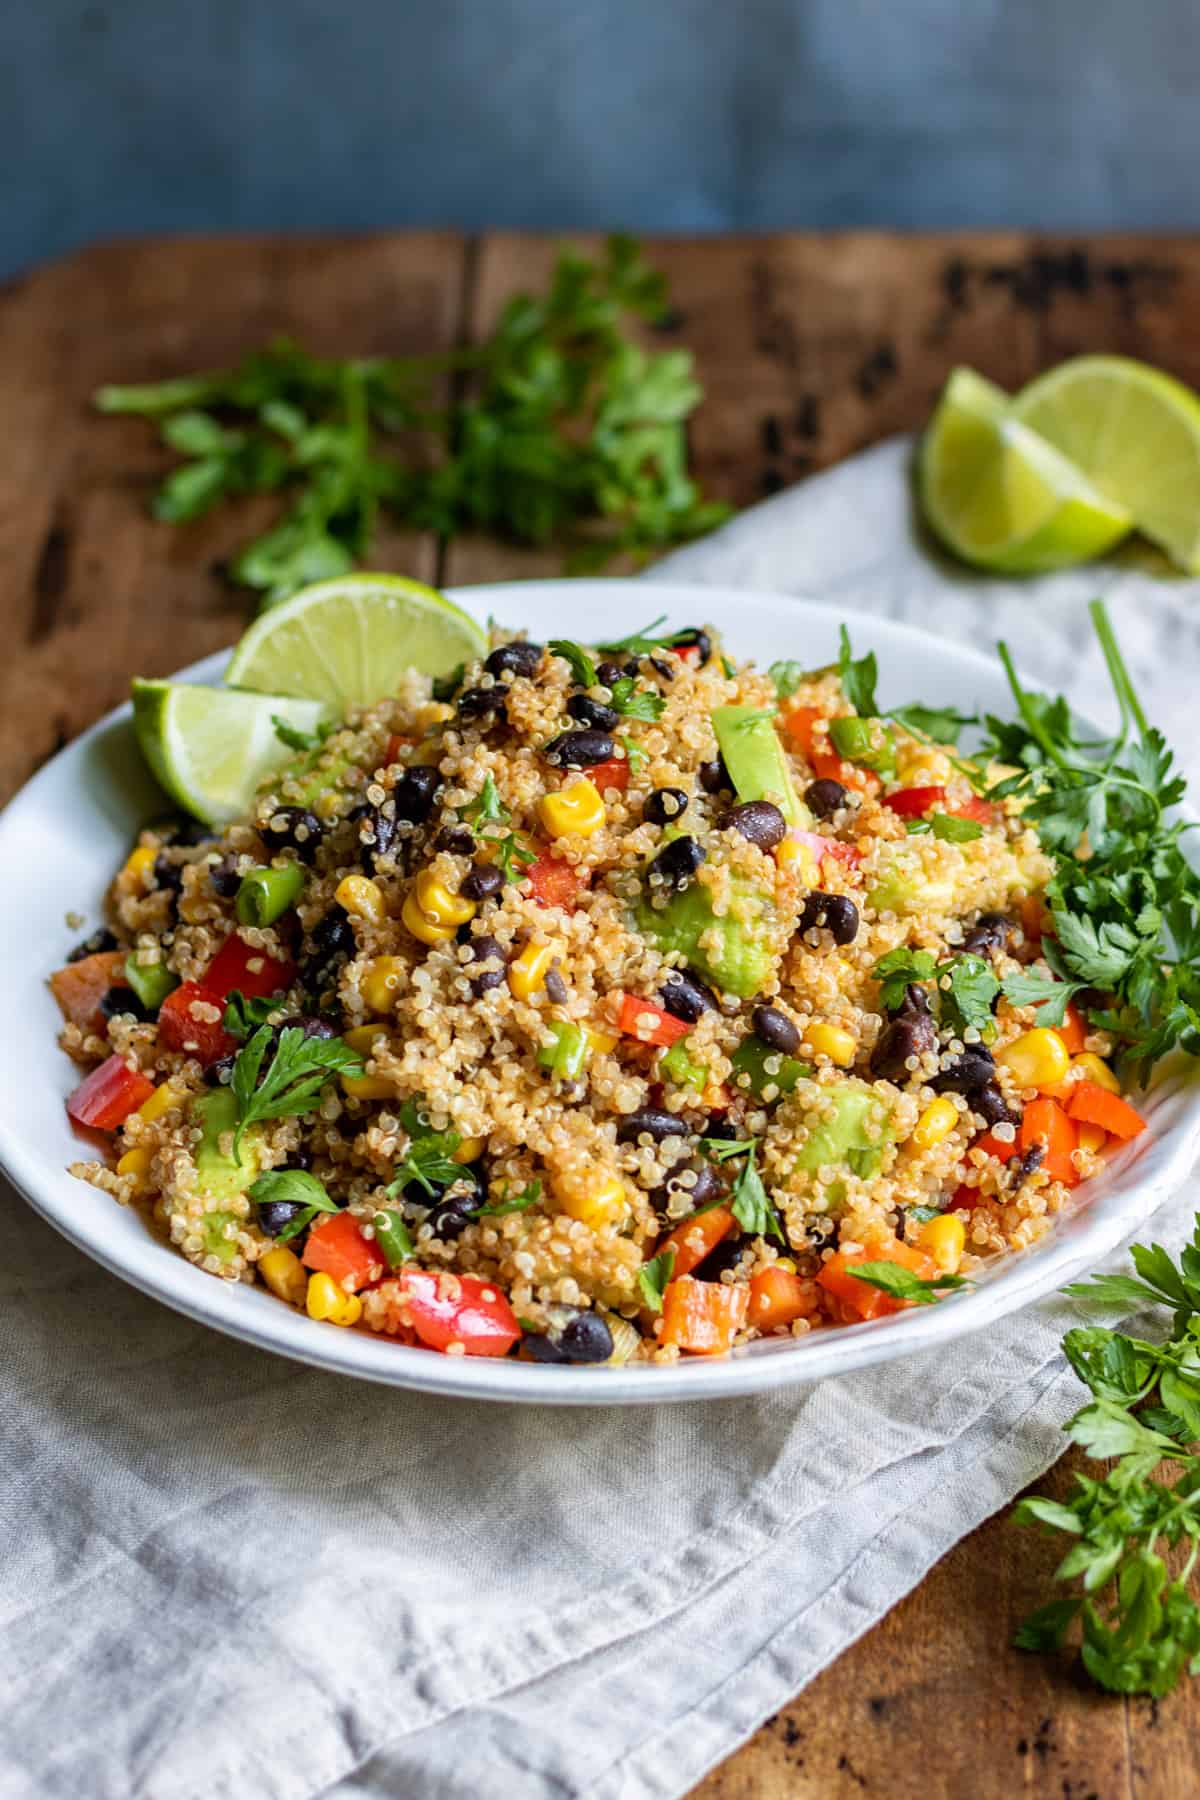 Table with a dish of quinoa and black beans.